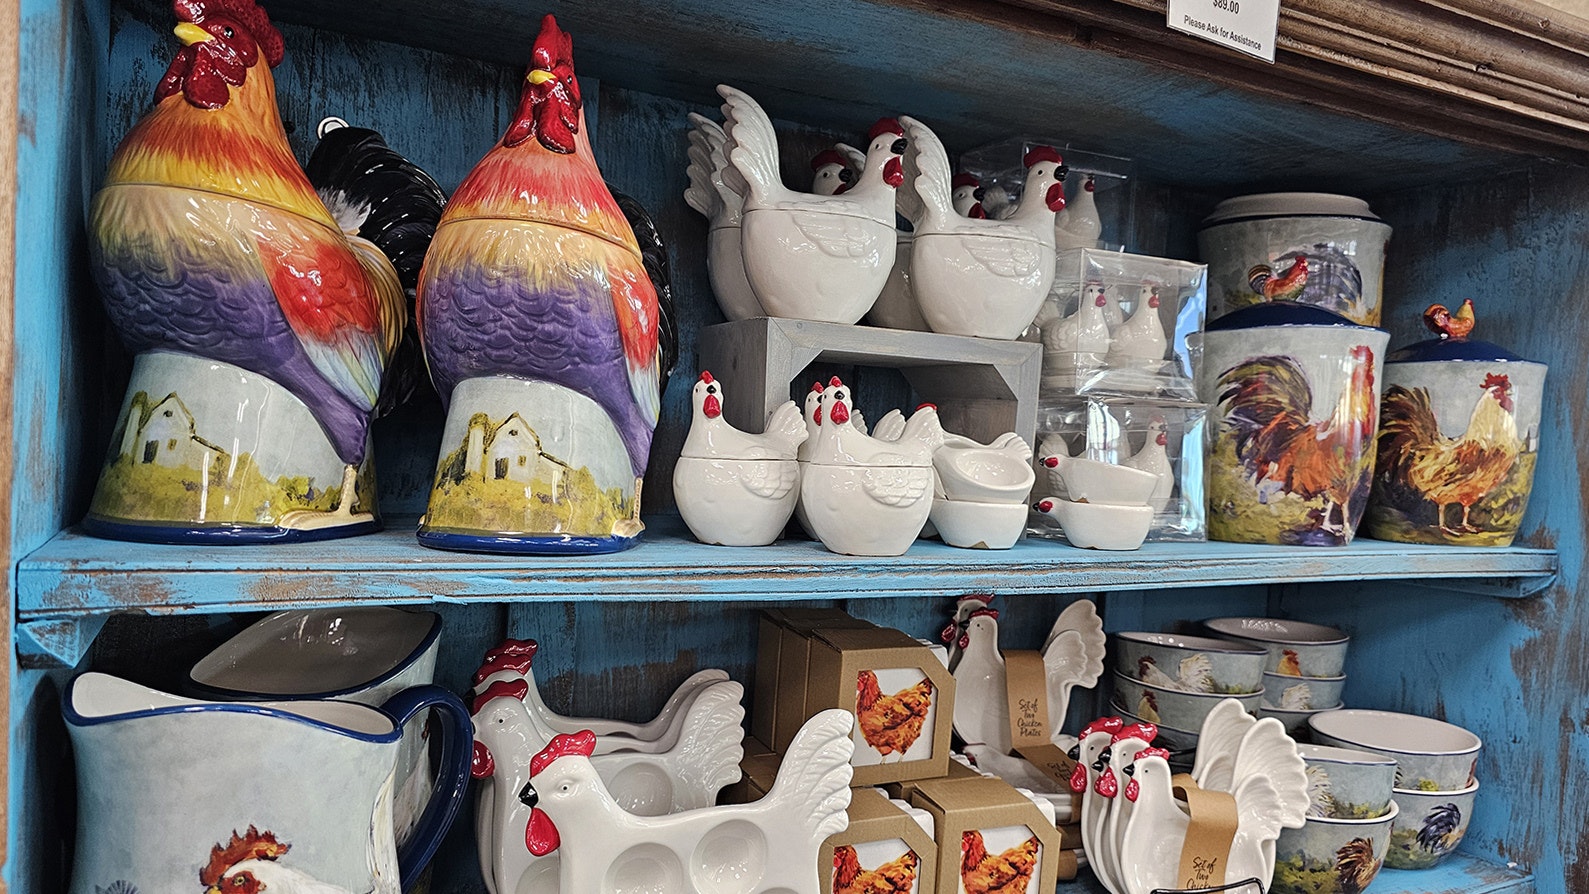 A variety of country kitsch is for sale at the new Buc-ee's store in Colorado.